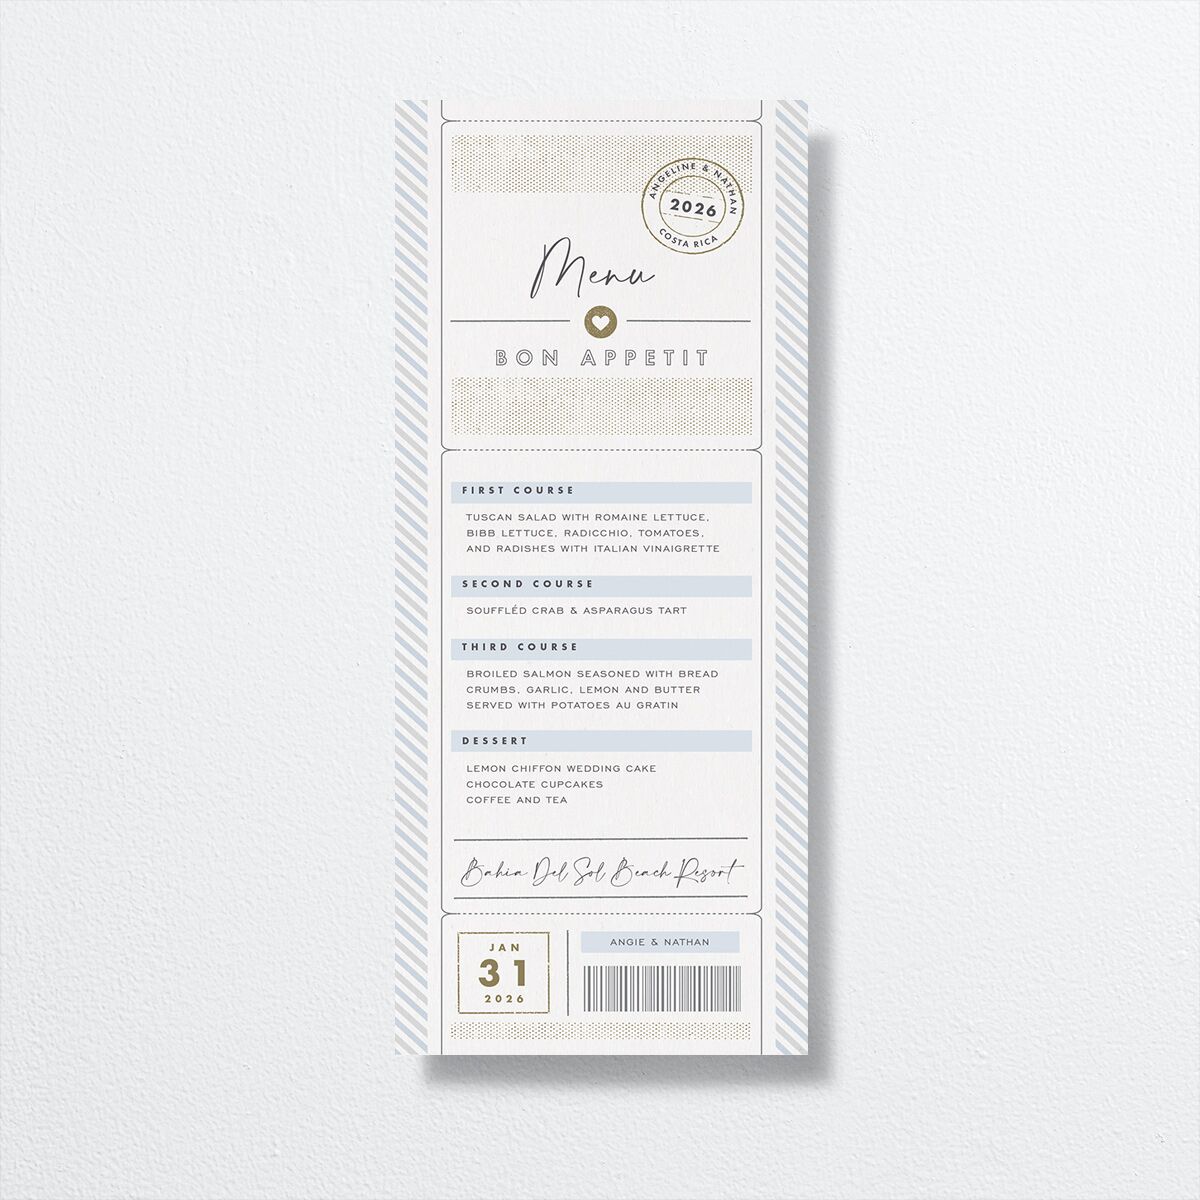 Vintage Boarding Pass Menus front in blue